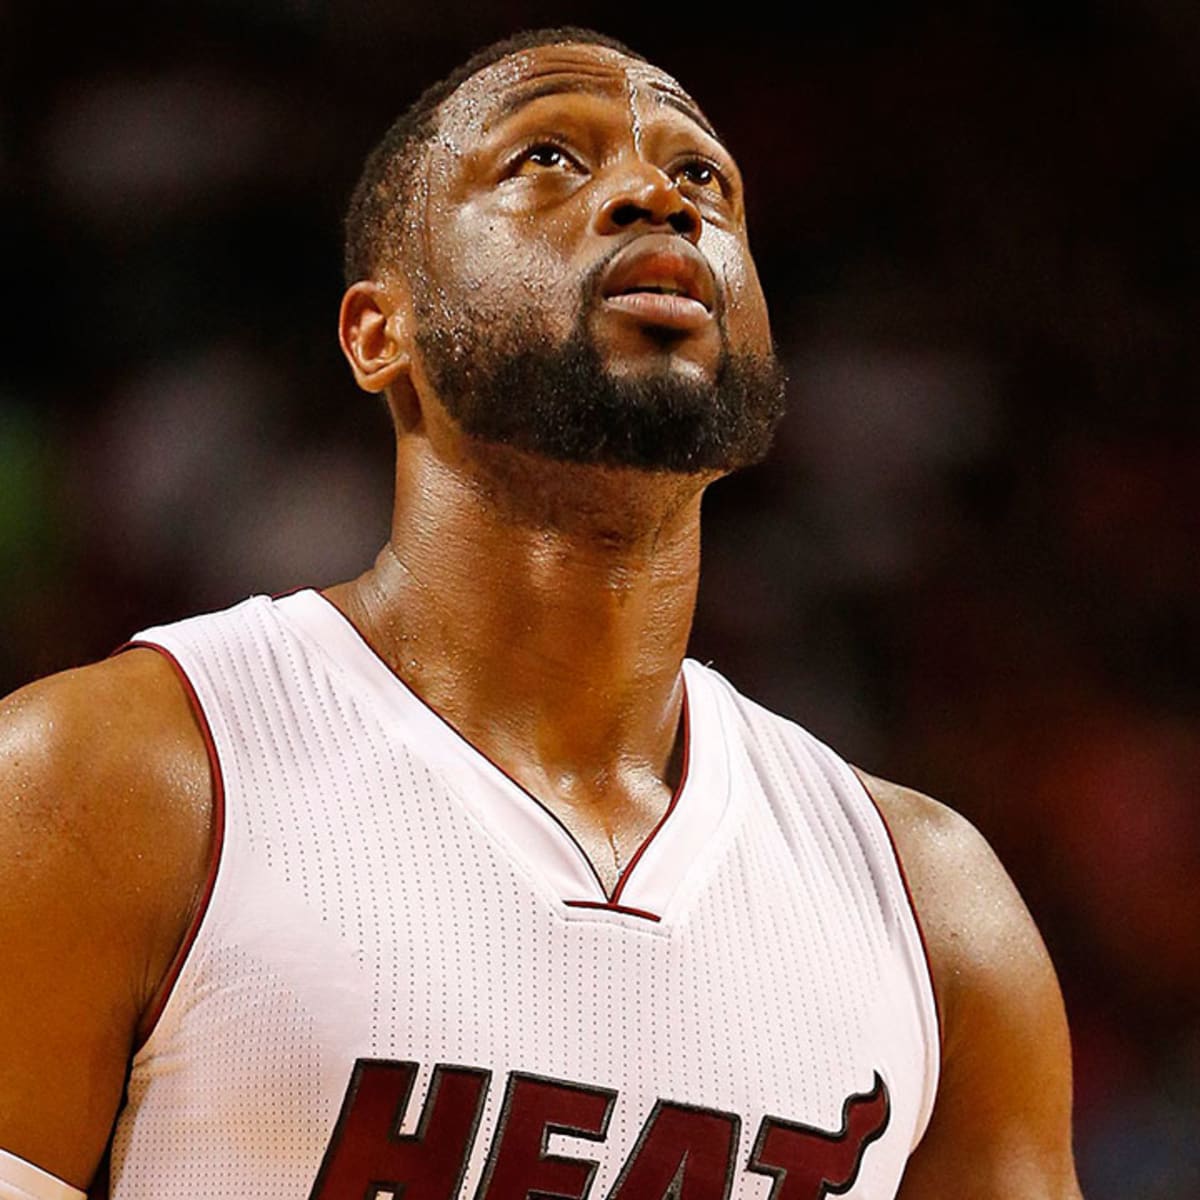 Miami Heat: Was Dwyane Wade robbed of MVP in 2008-09?